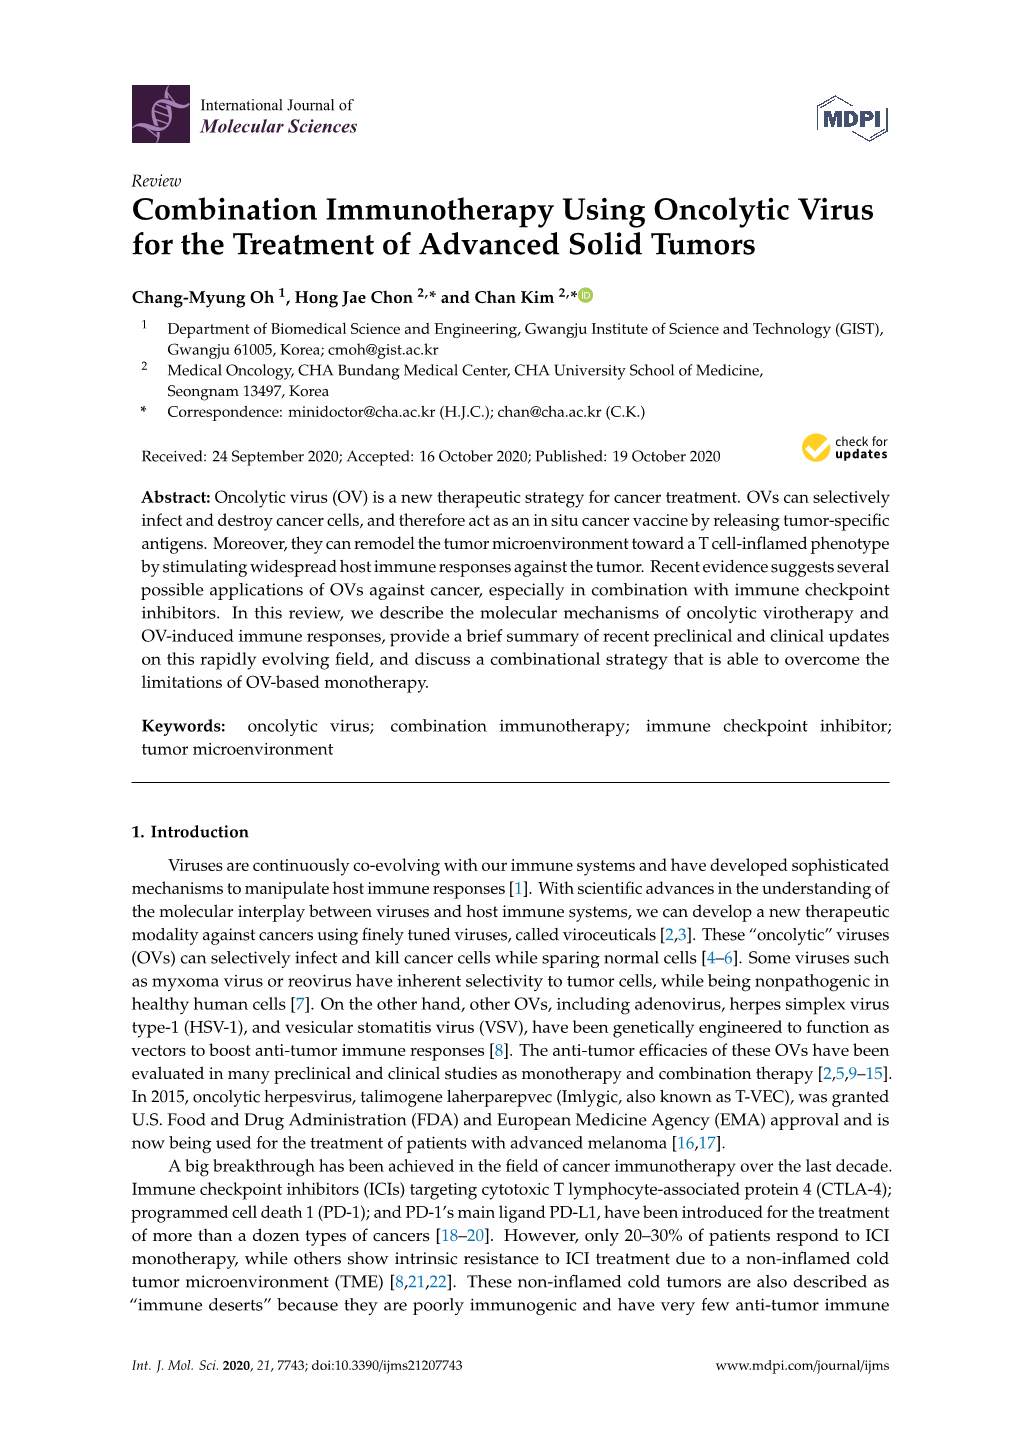 Combination Immunotherapy Using Oncolytic Virus for the Treatment of Advanced Solid Tumors